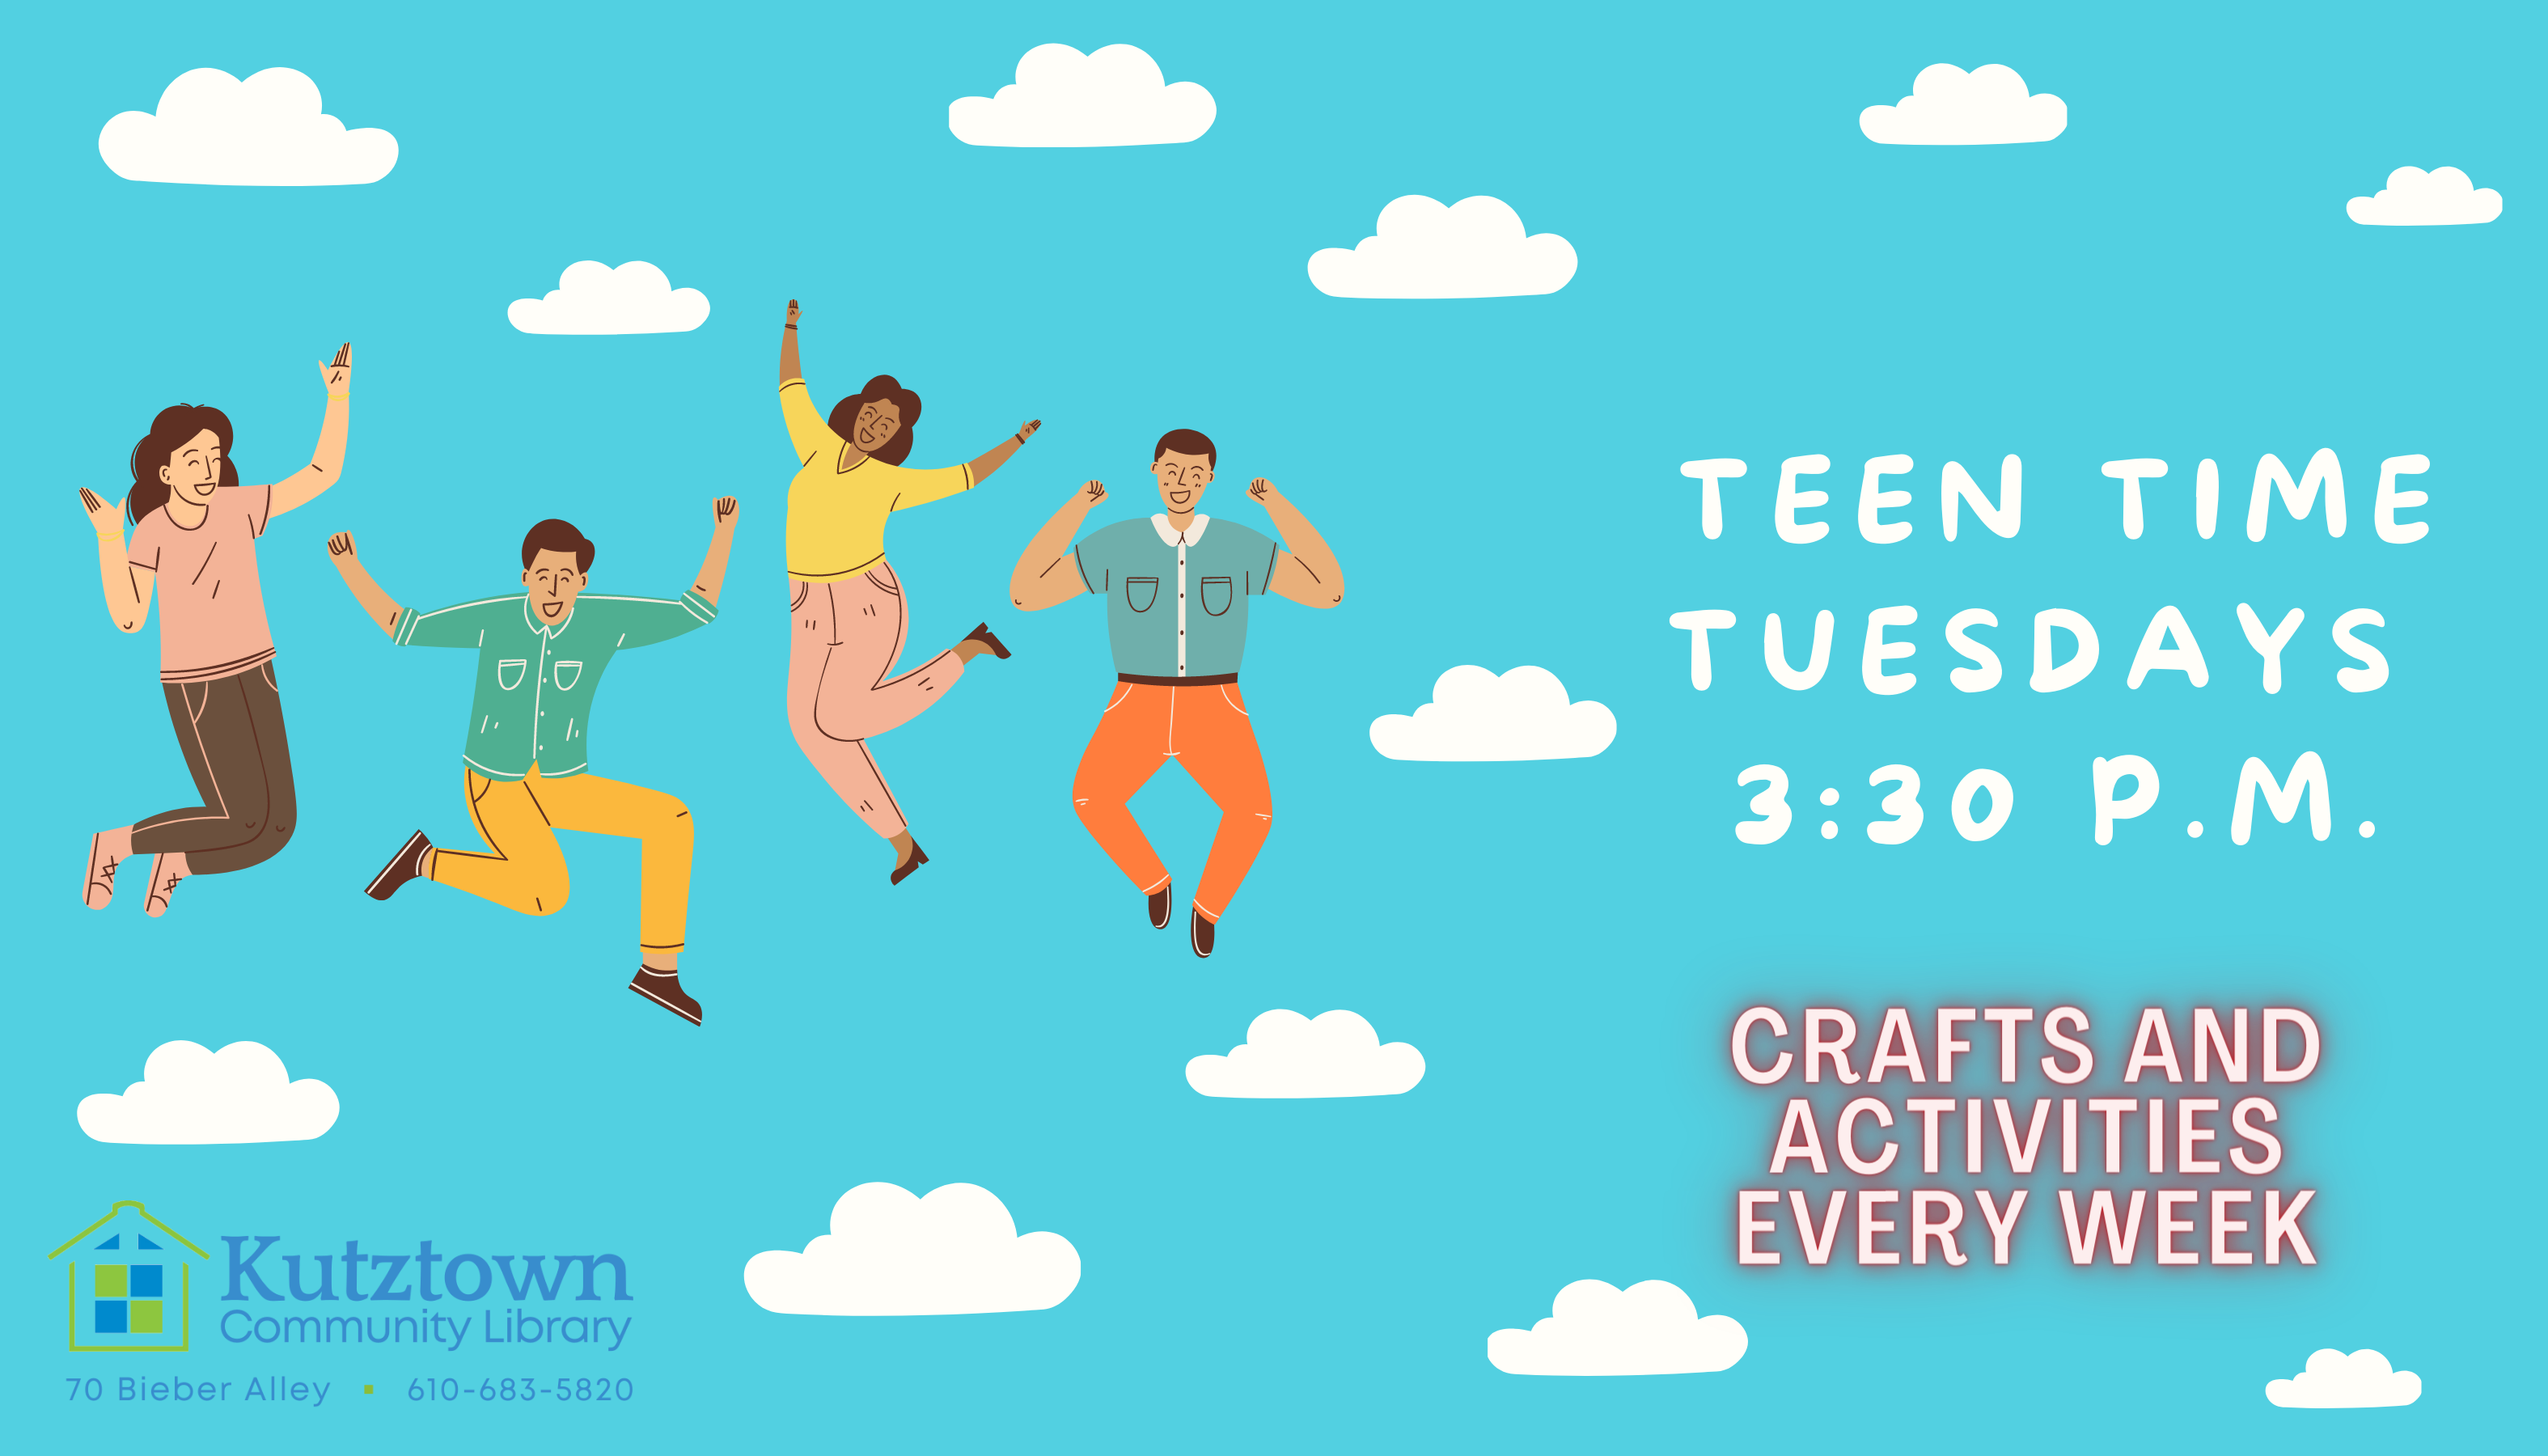 Teen Time takes place Tuesdays at 3:30 p.m.